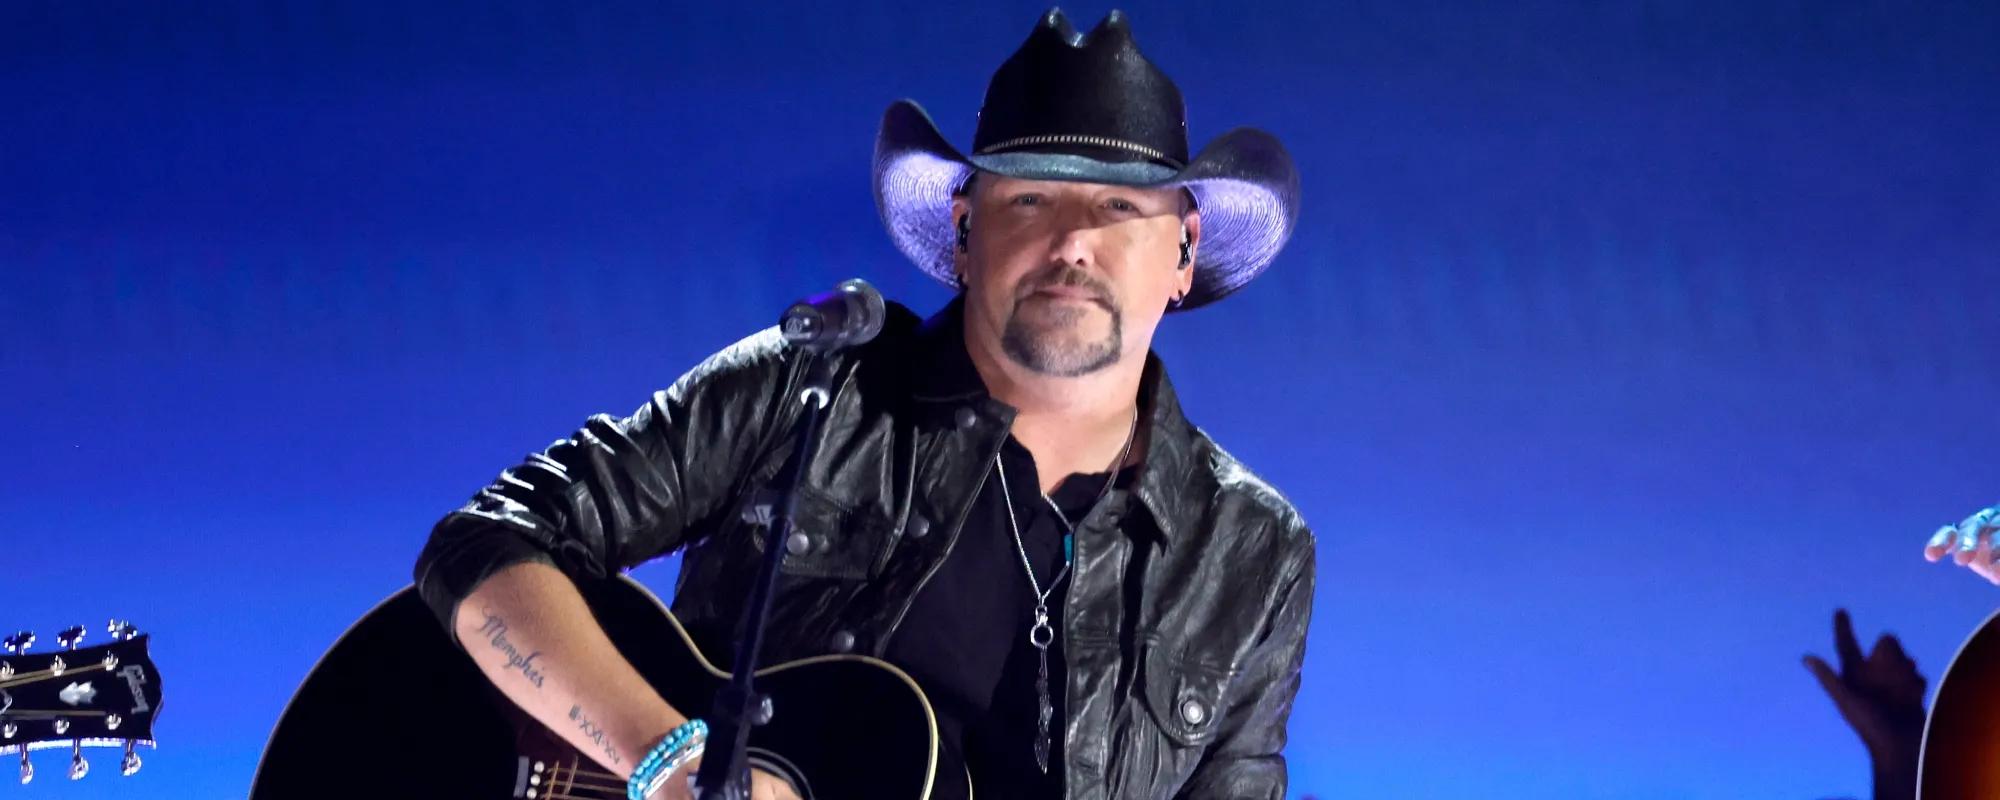 Jason Aldean Speaks on the Impact of His Toby Keith Tribute Performance at ACM Awards [Video]